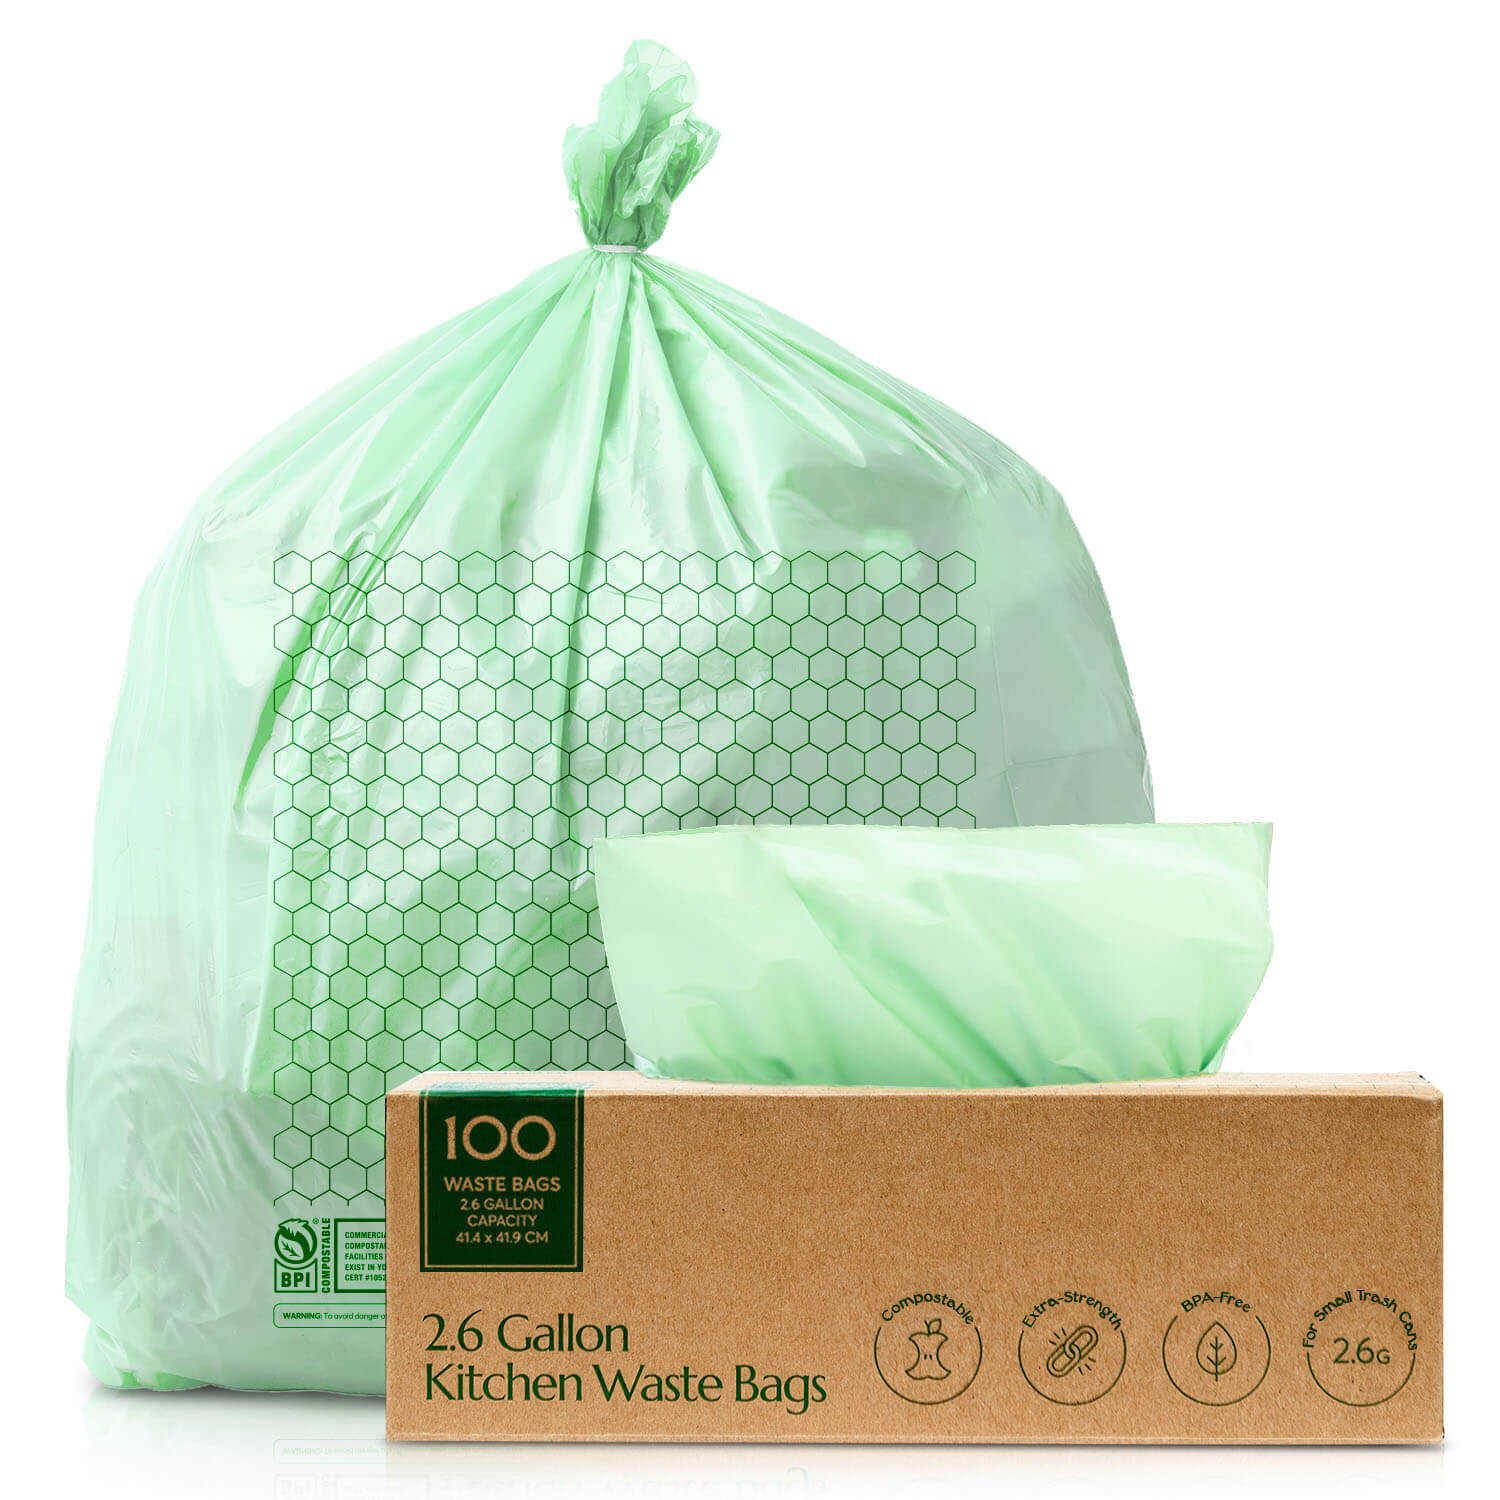 Buy Compostable Trash Bags, 2.6 Gallon, 10 Liter, Extra Thick 0.78